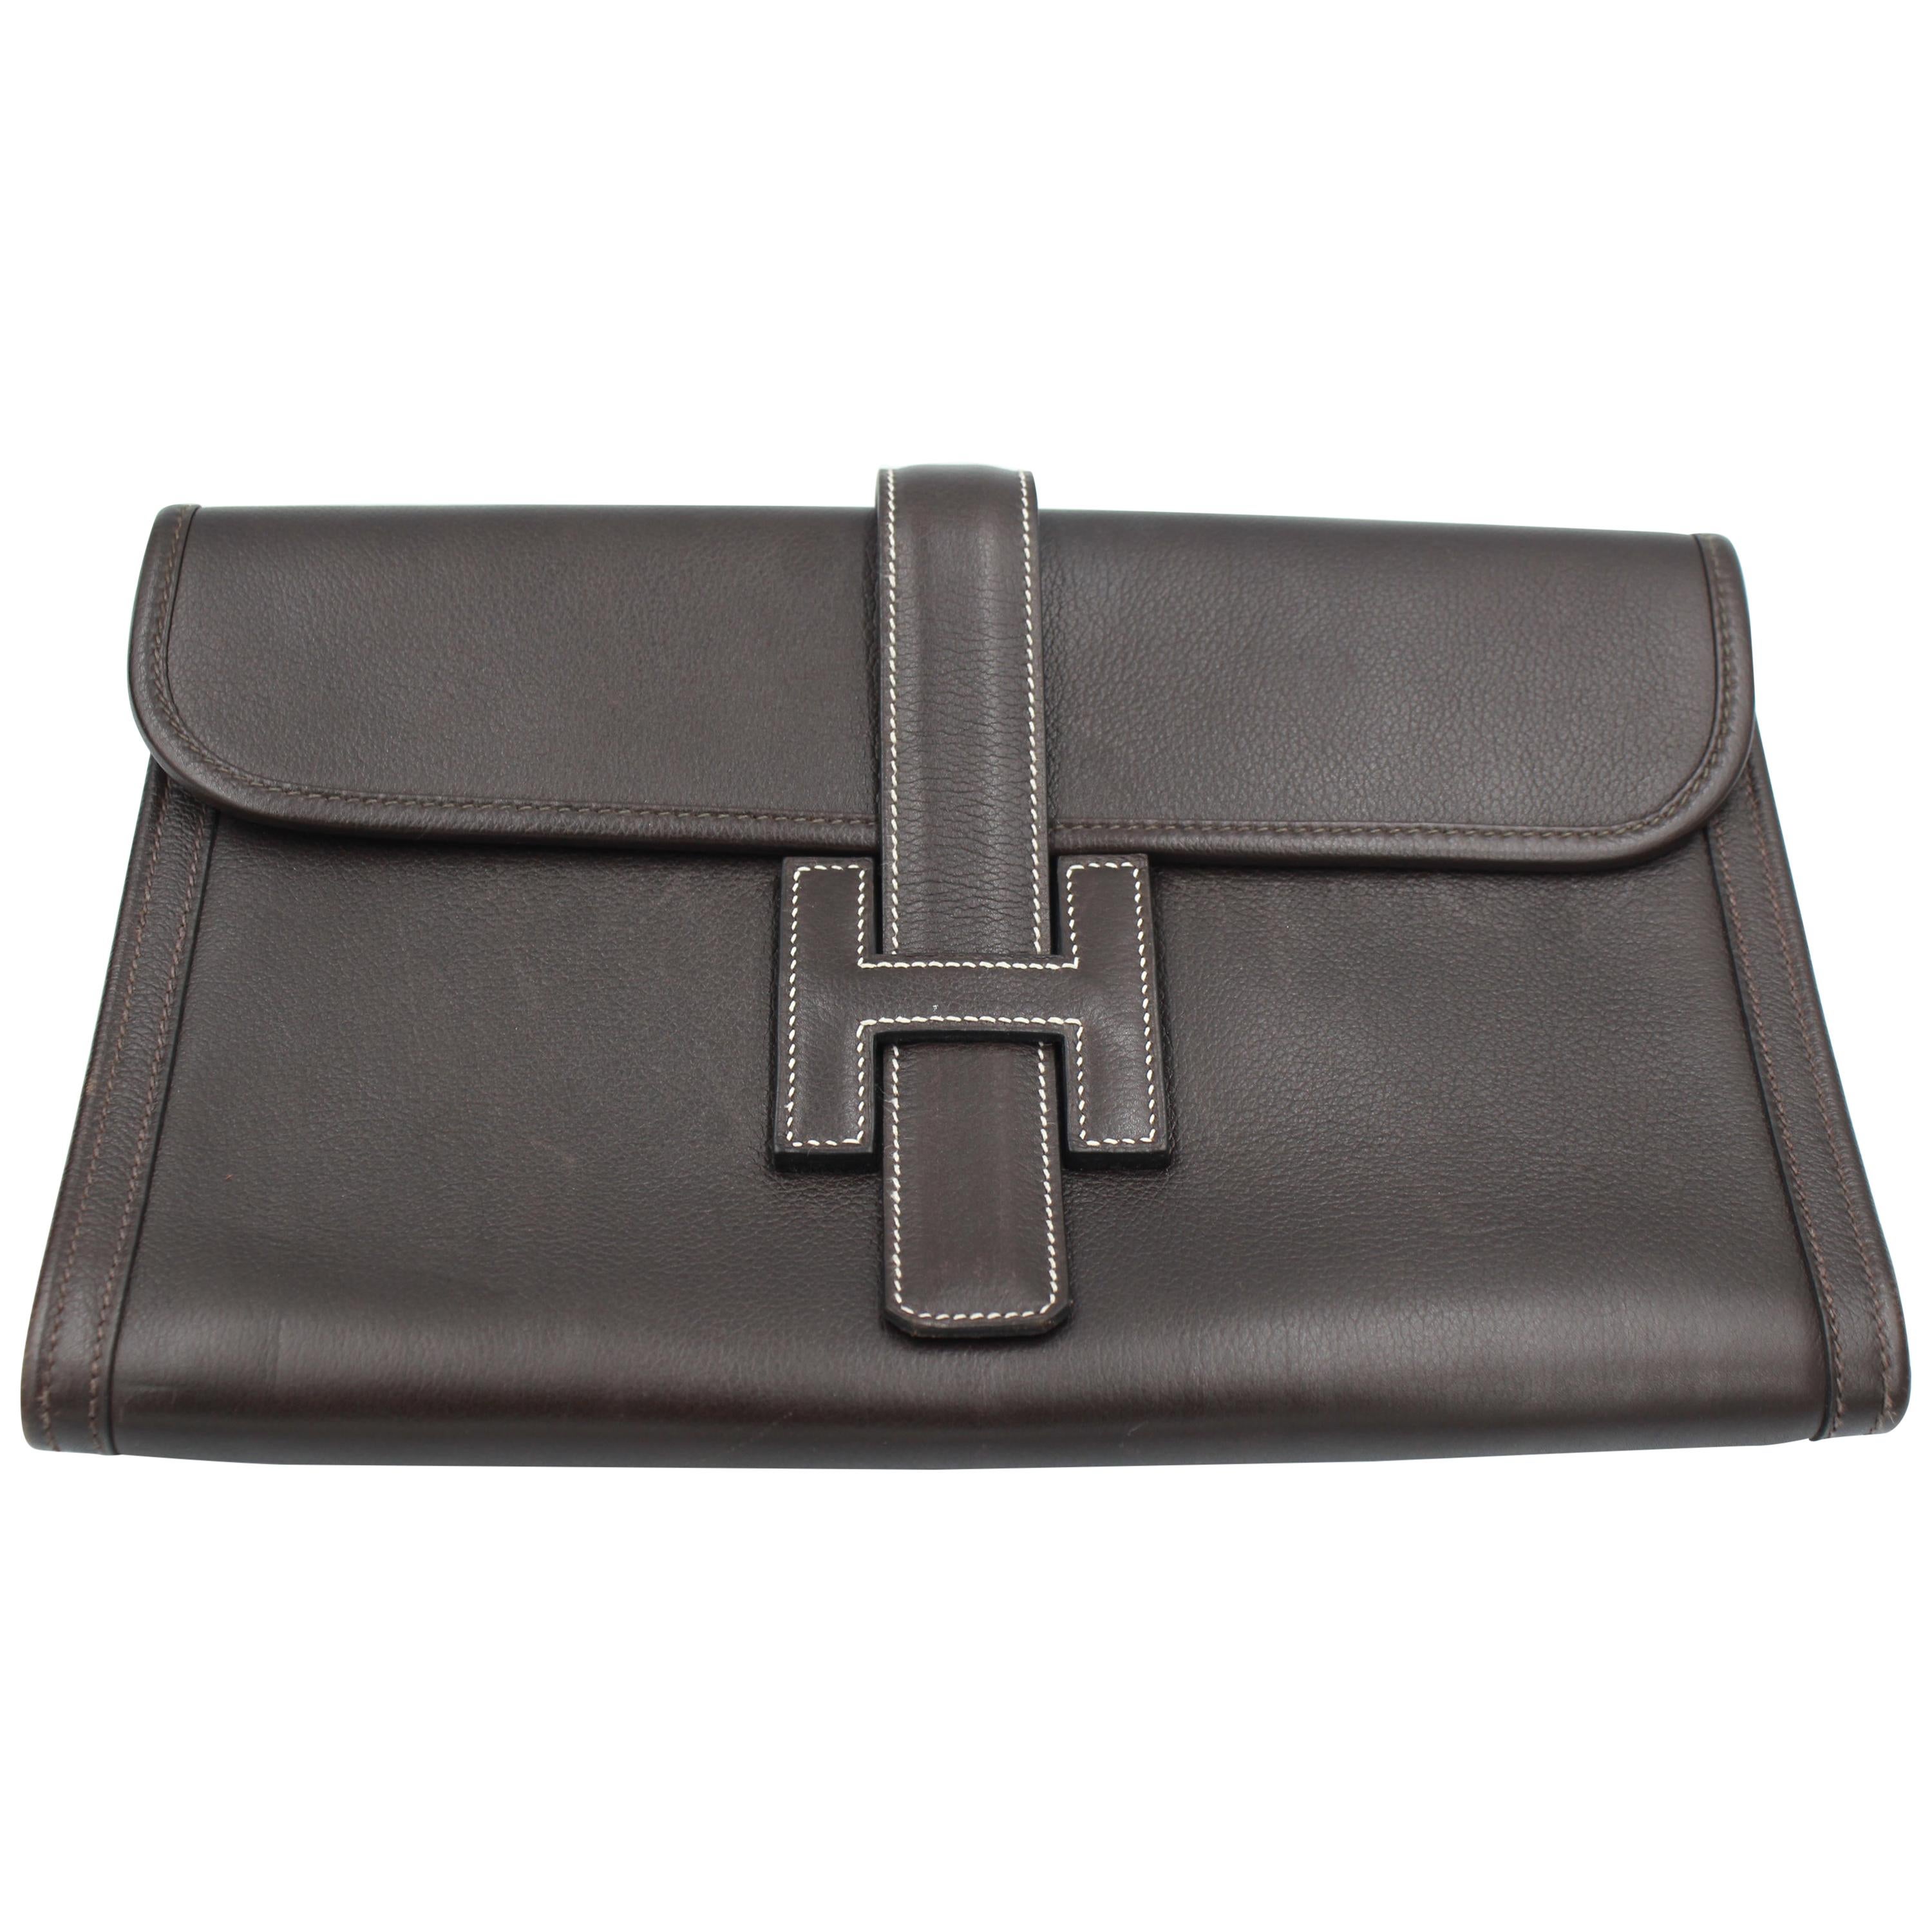 Hermes vintage Jige clutch in brown grained leather For Sale